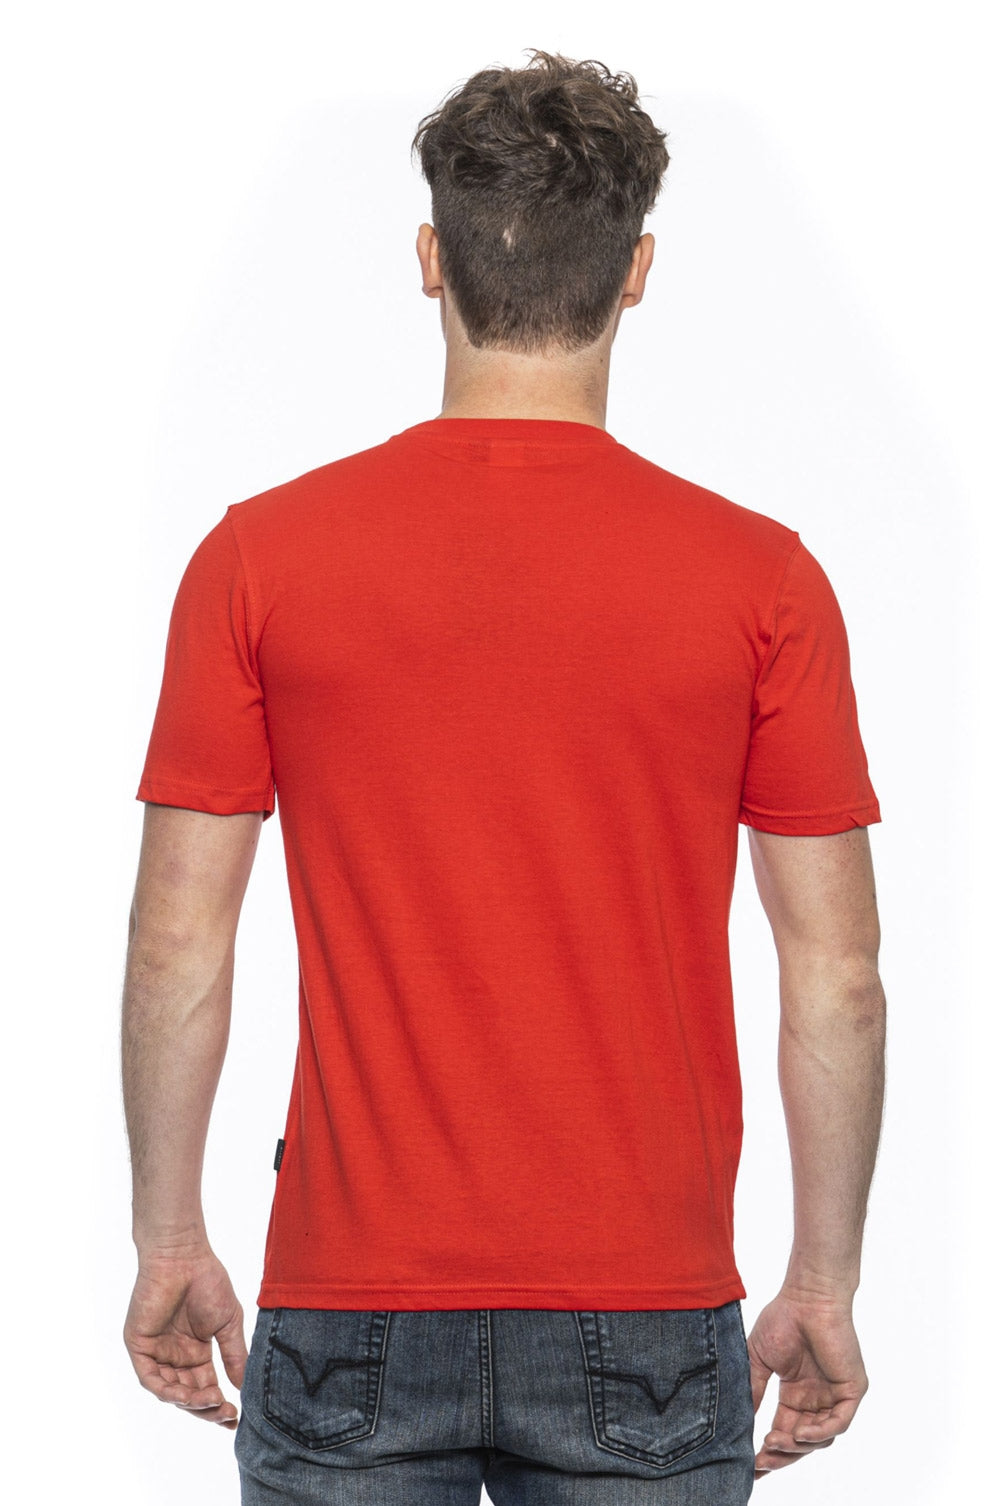 19V69 Italia Mens T-Shirt Red MIKE RED